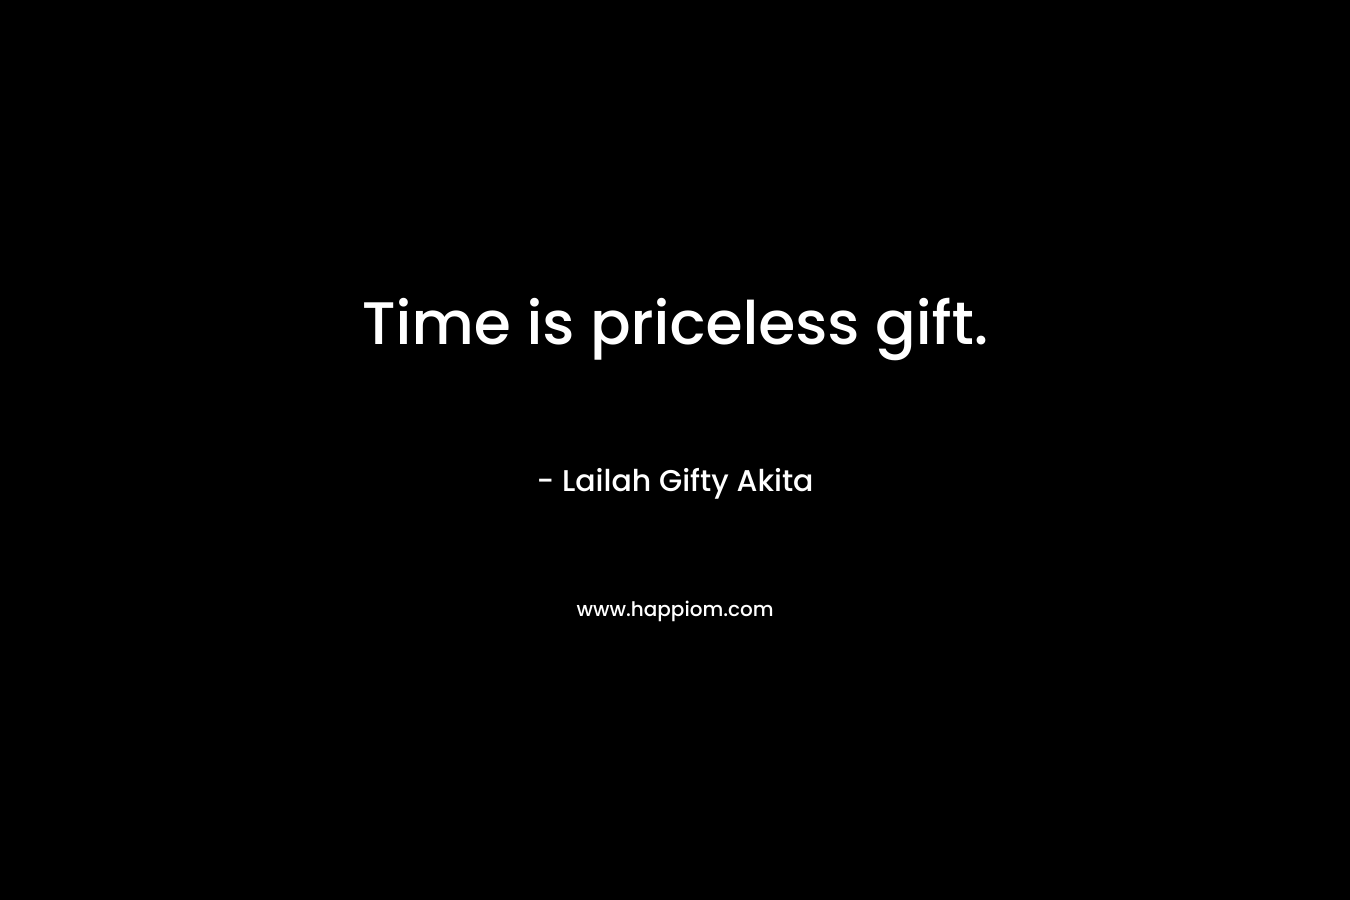 Time is priceless gift.